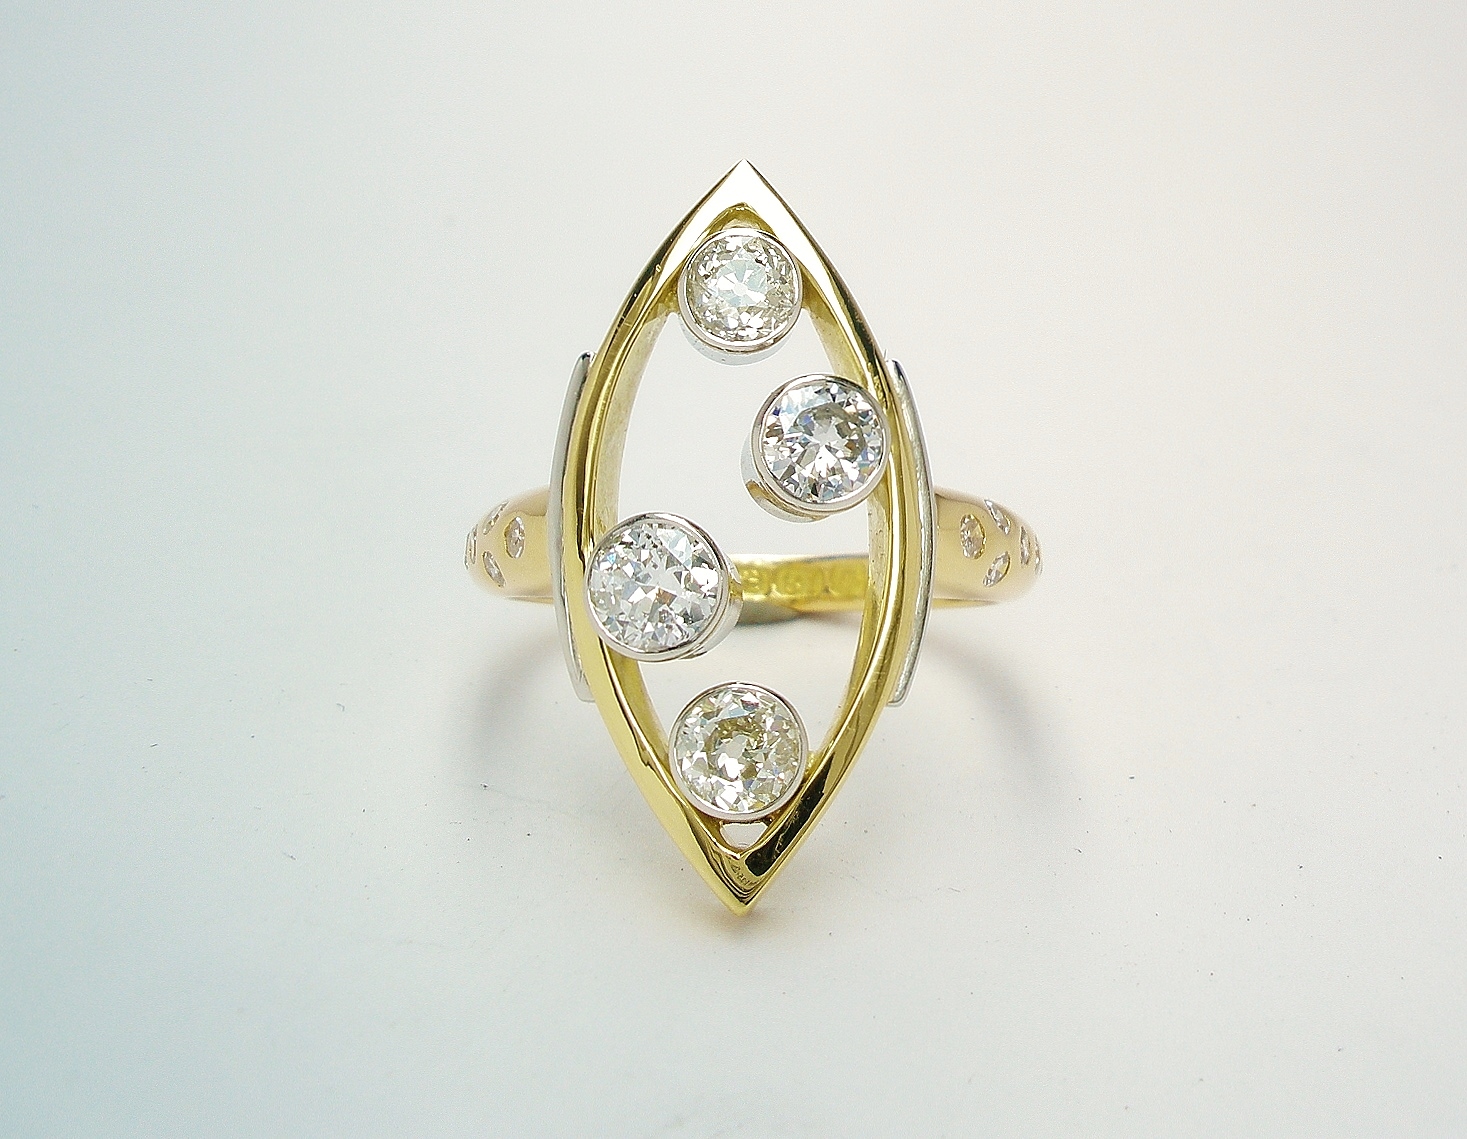 A 4 stone Victorian cut and round brilliant cut diamond marquise shaped ring mounted in 18ct. yellow gold and platinum with small brilliant cut round diamonds flush set in the shoulders.